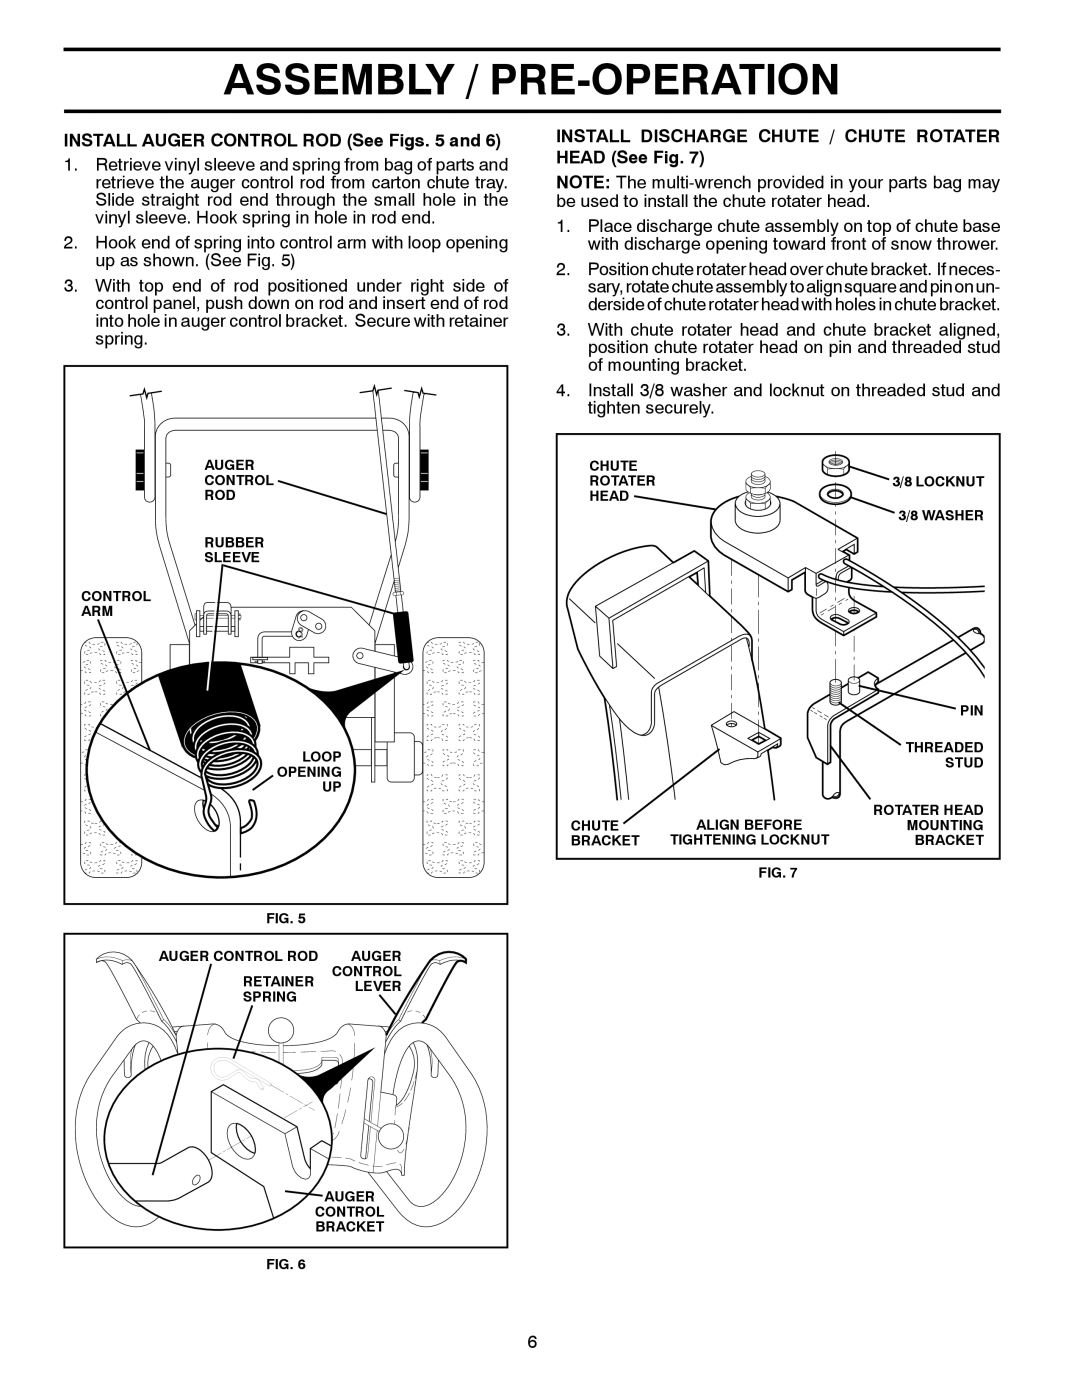 Poulan 429896, 96192003201 owner manual Assembly / Pre-Operation, INSTALL AUGER CONTROL ROD See Figs. 5 and 